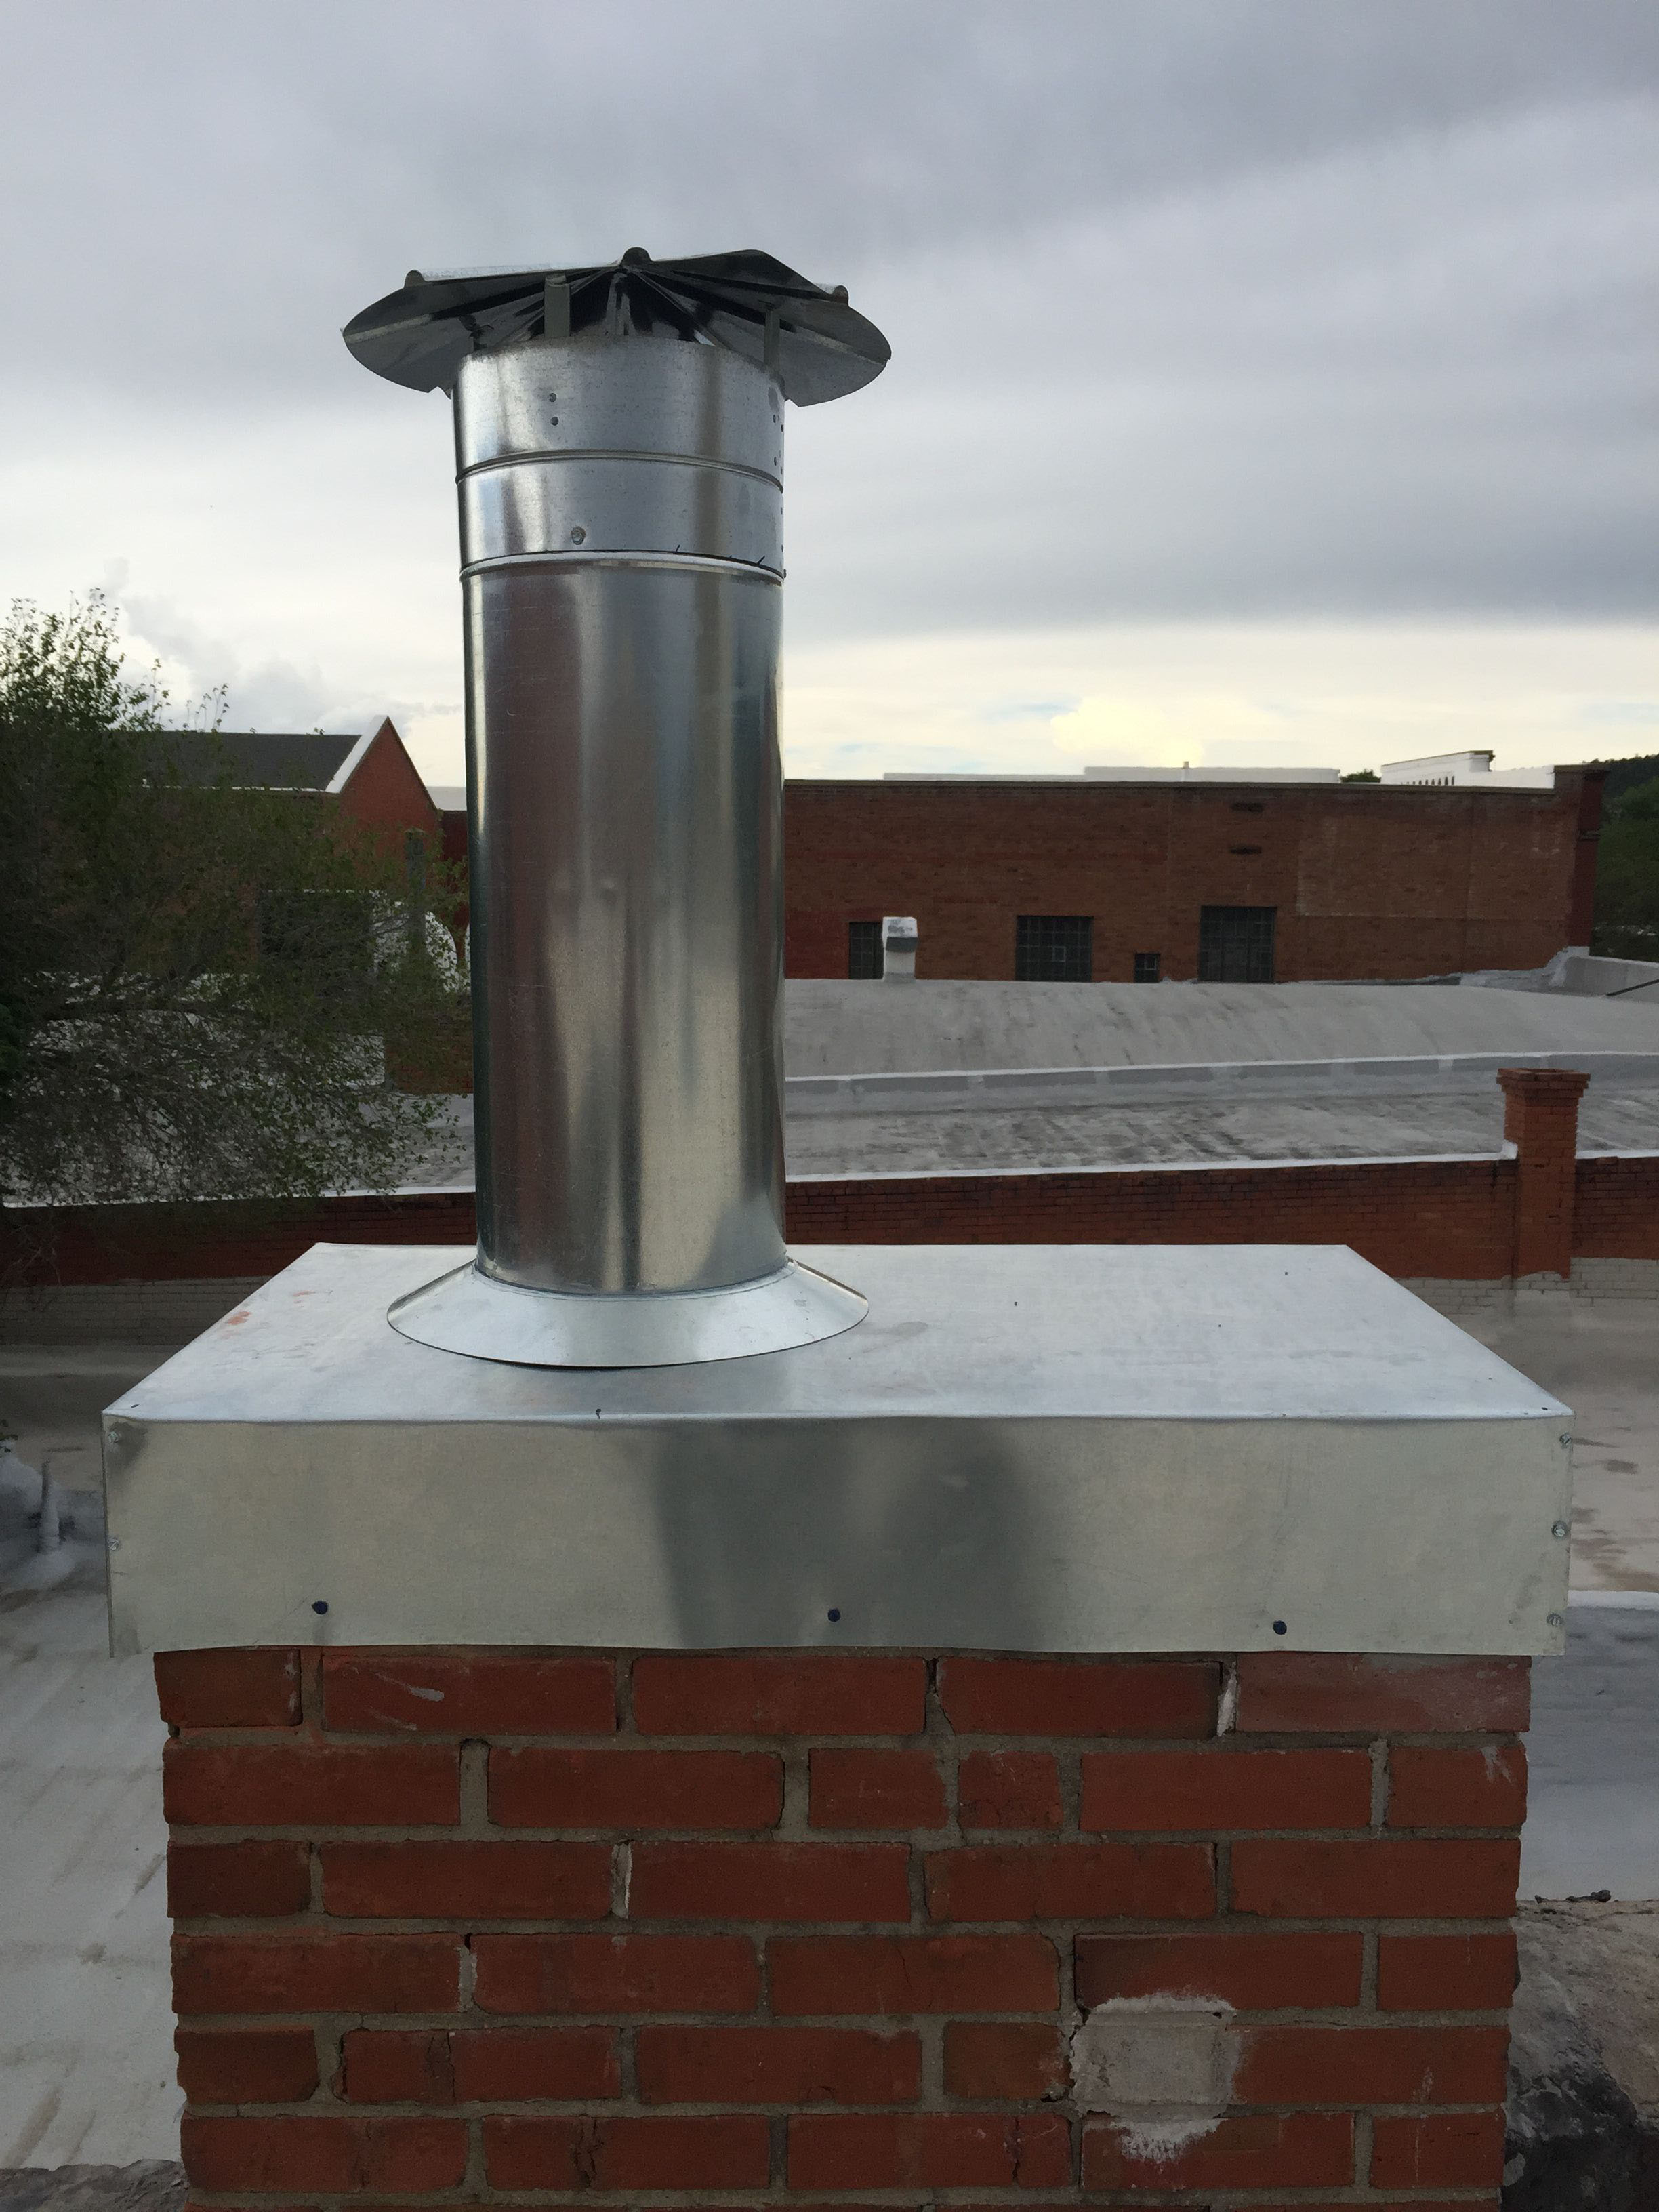 Chimney Cap and Vent Penetration